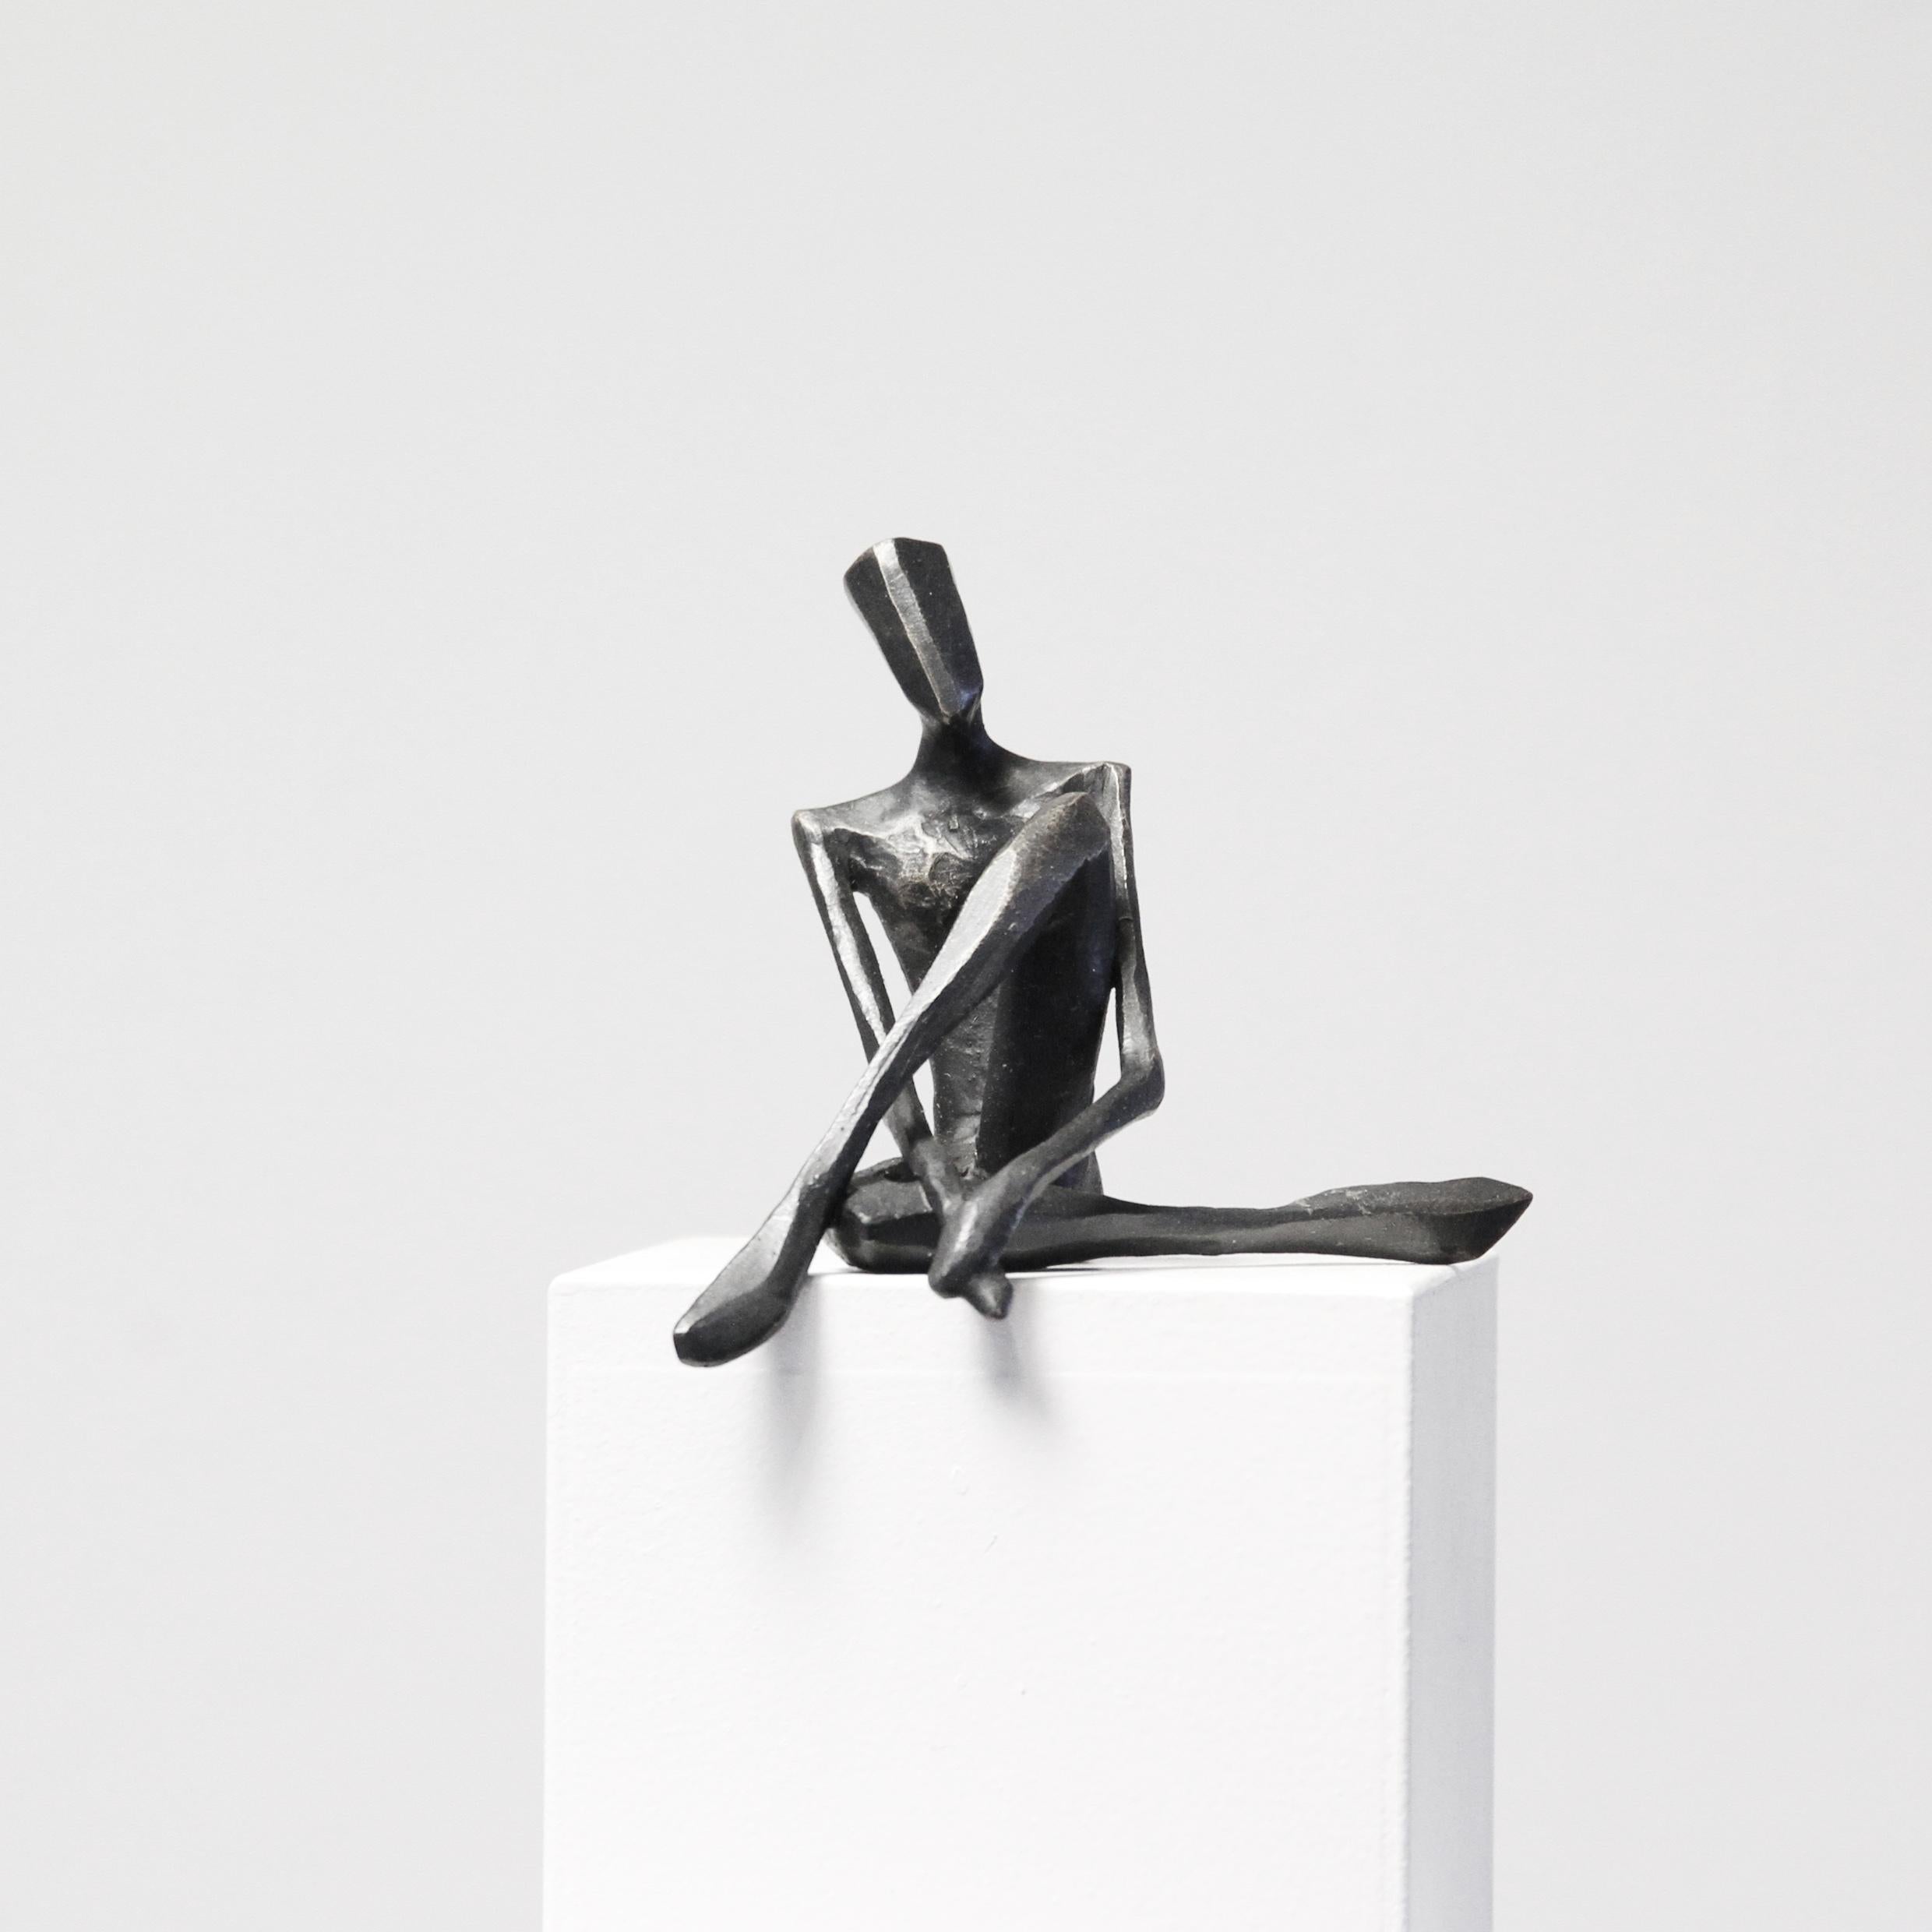 John is a figurative bronze sculpture in a relaxed pose by Nando Kallweit.

Modelled on modern youthful postures but with a nod to the importance of heritage through the stylised Egyptian-influenced head. A lovely piece on its own or with a group of